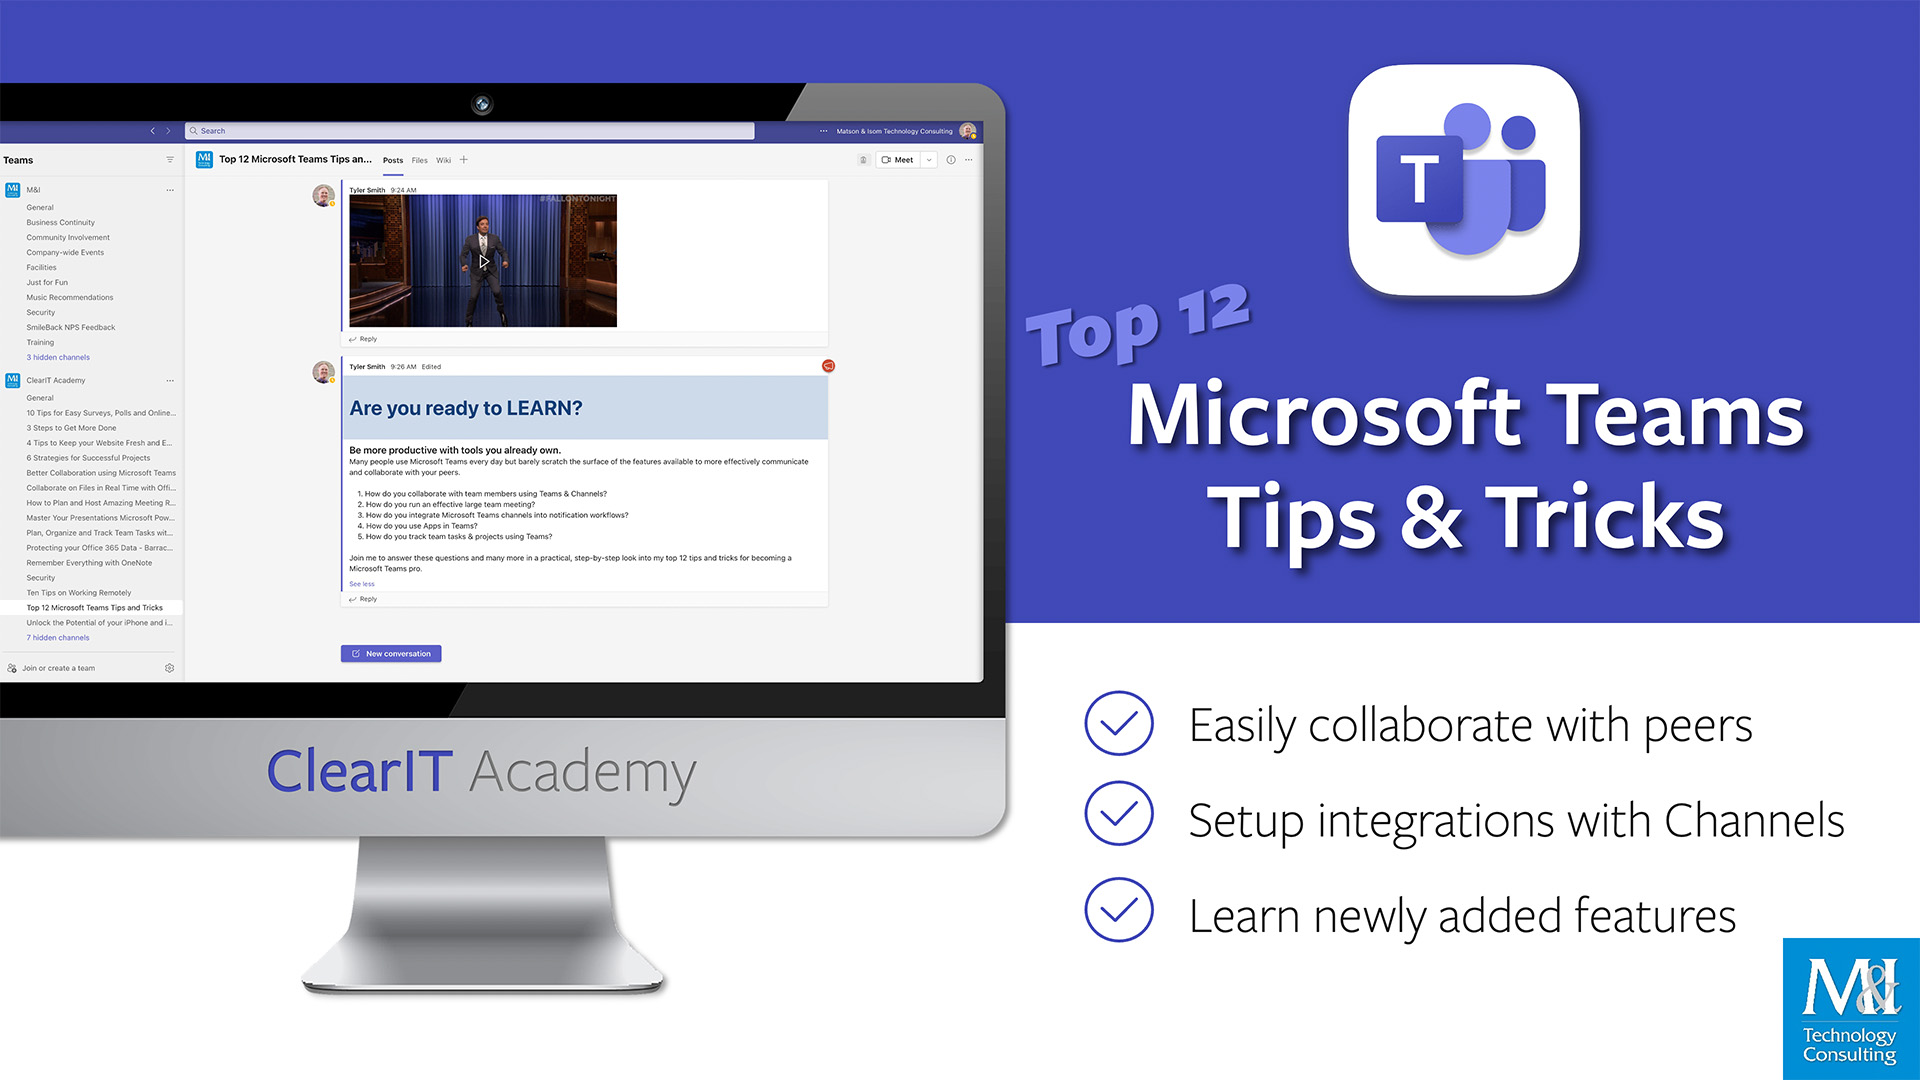 clearit-academy-top-12-microsoft-teams-tips-and-tricks